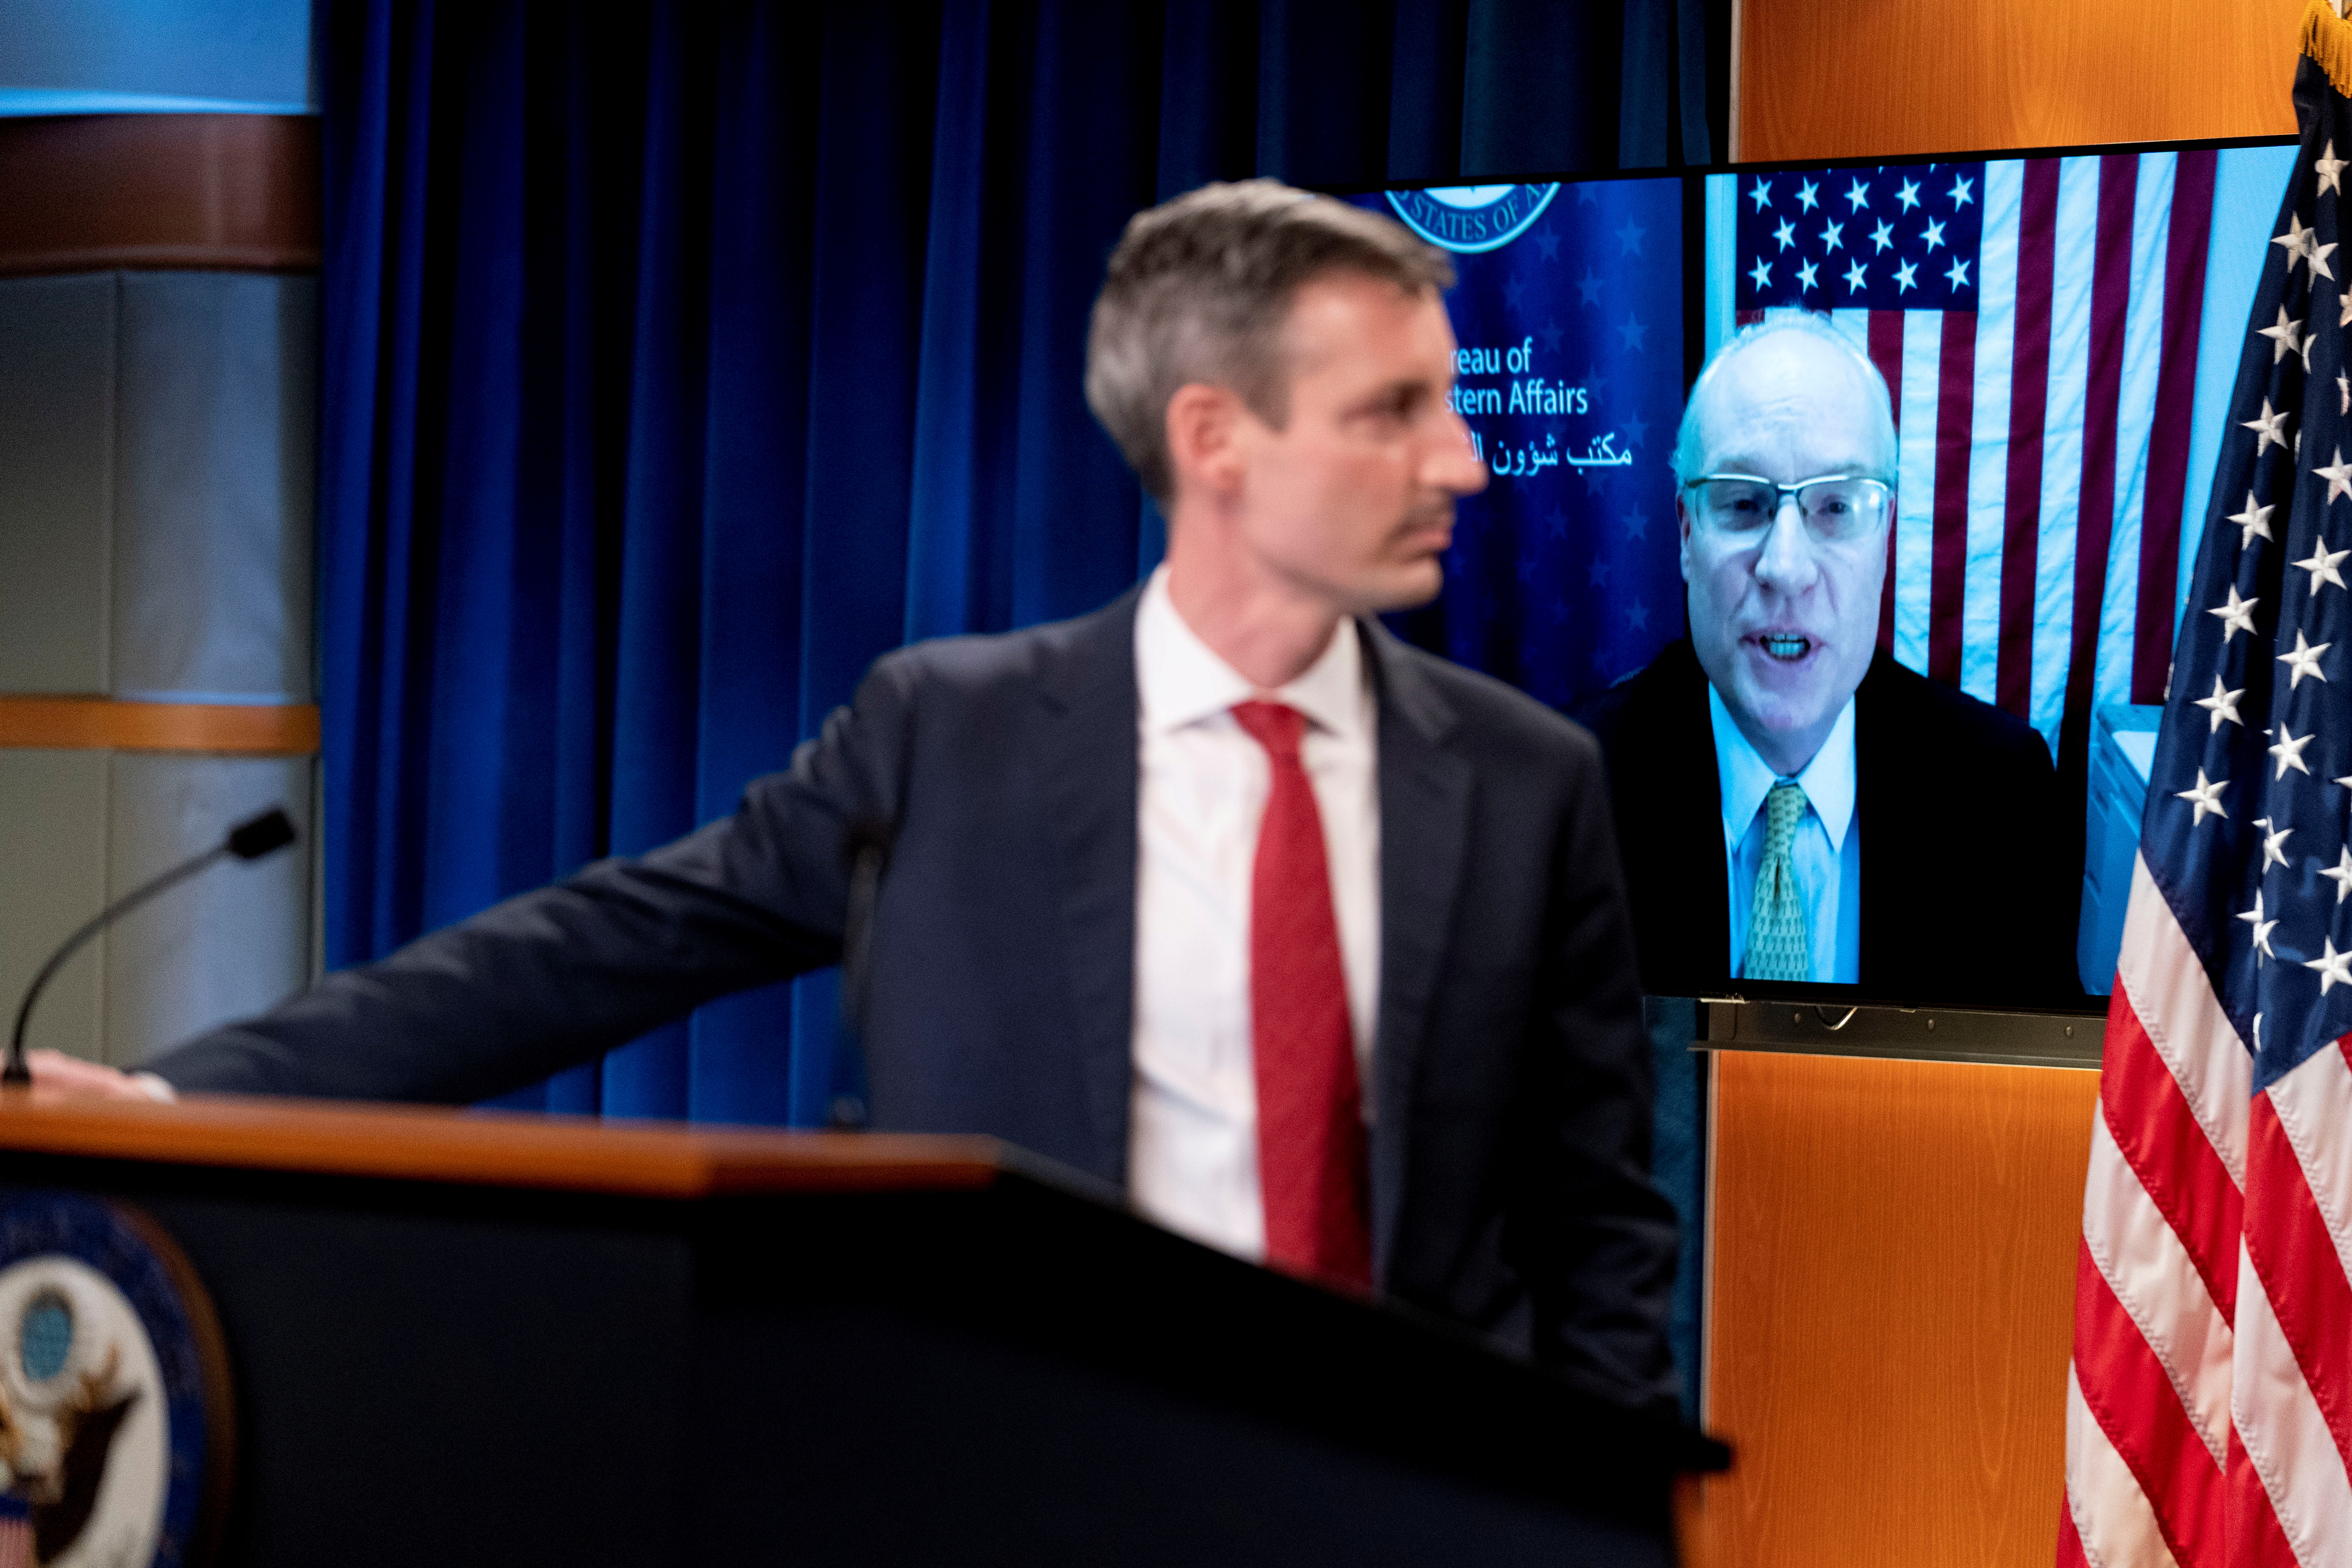 U.S. Special Envoy for Yemen Timothy Lenderking, accompanied by State Department spokesman Ned Price, left, speaks via teleconference during a news conference at the State Department in Washington, U.S., February 16, 2021. Andrew Harnik/Pool via REUTERS/File Photo